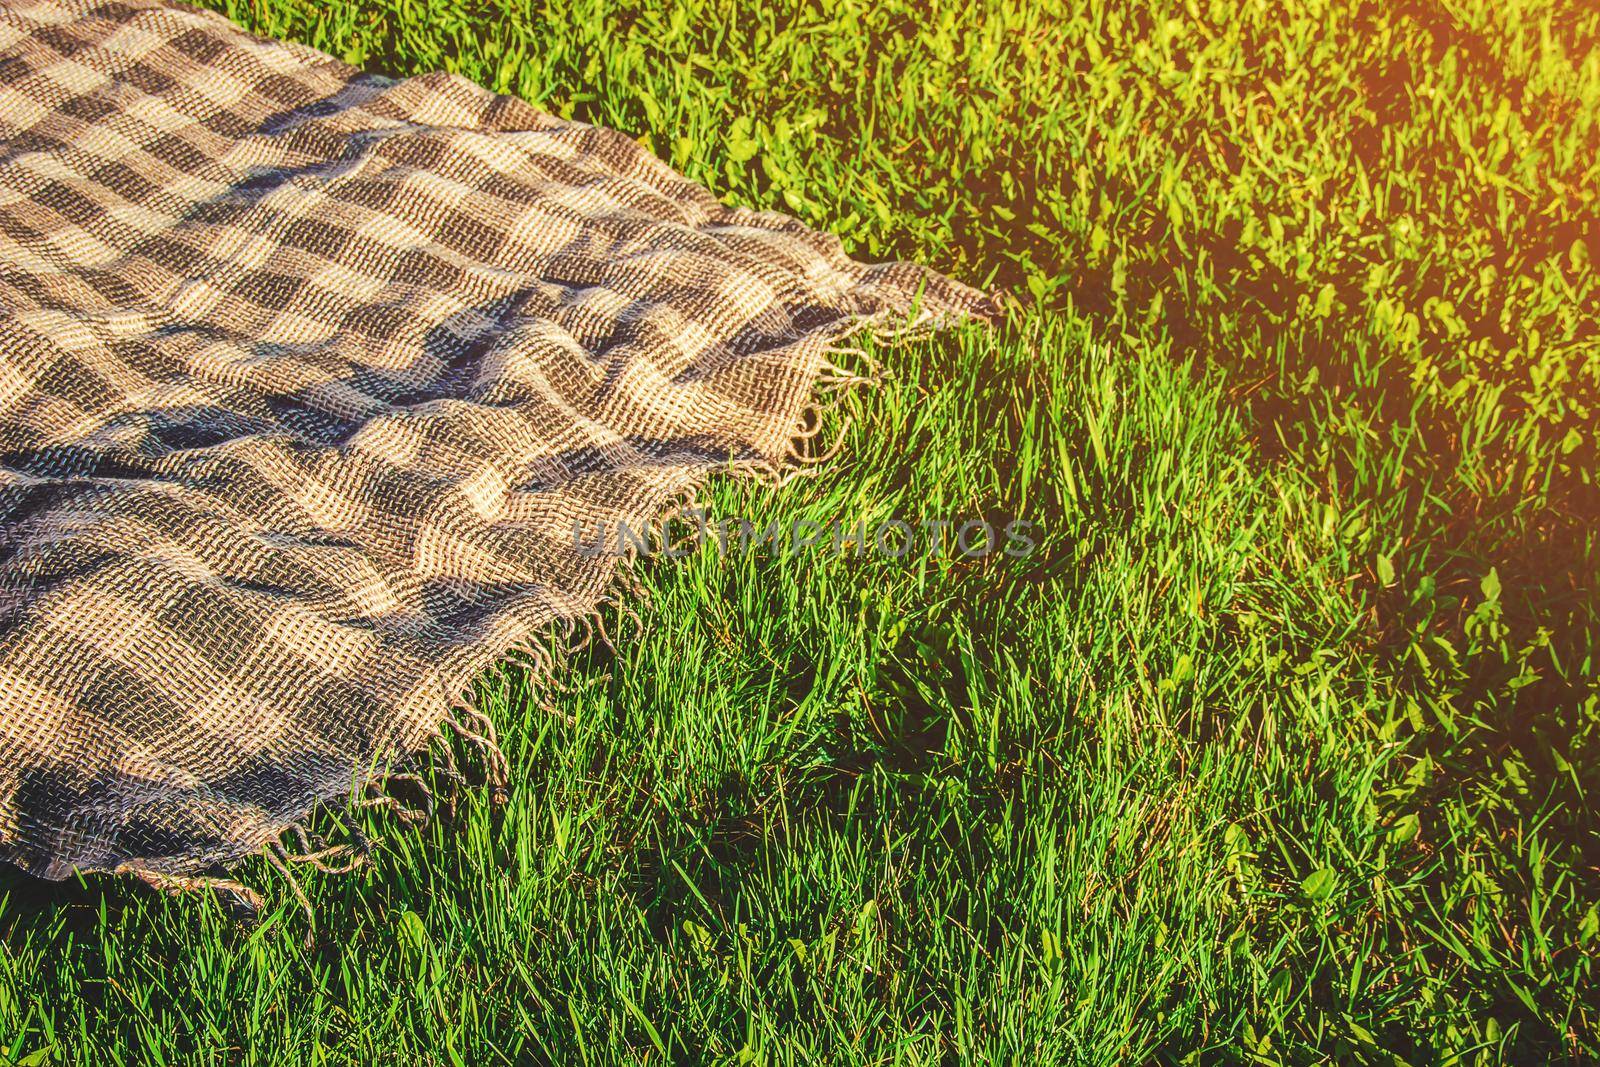 Plaid for a picnic on the grass. Selective focus. by yanadjana